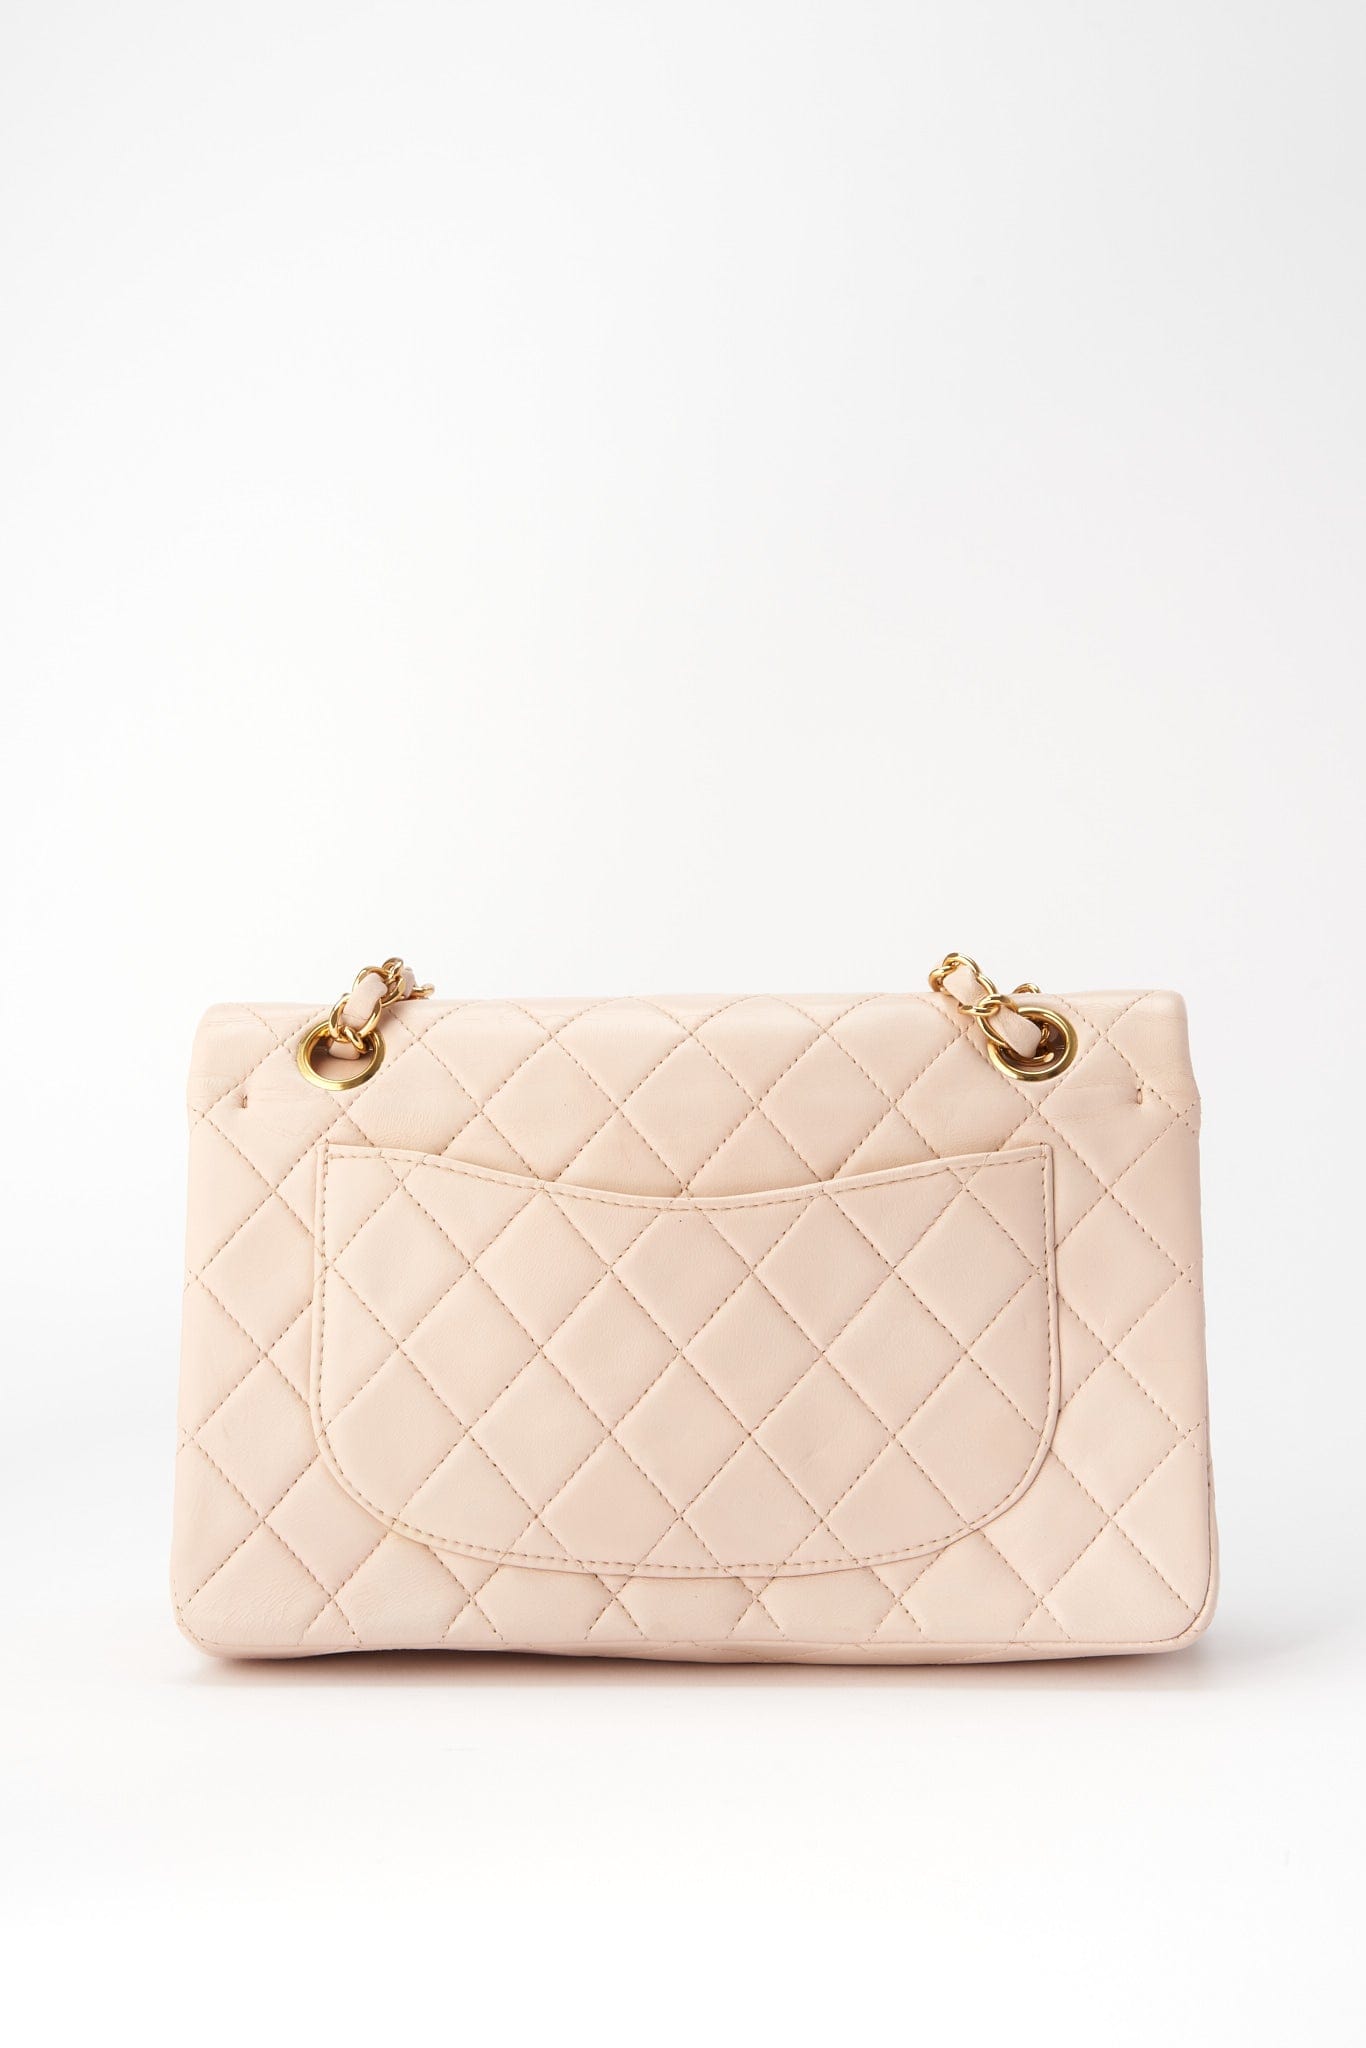 Chanel Classic Double Flap Bag Small - Powder Pink Quilted Leather